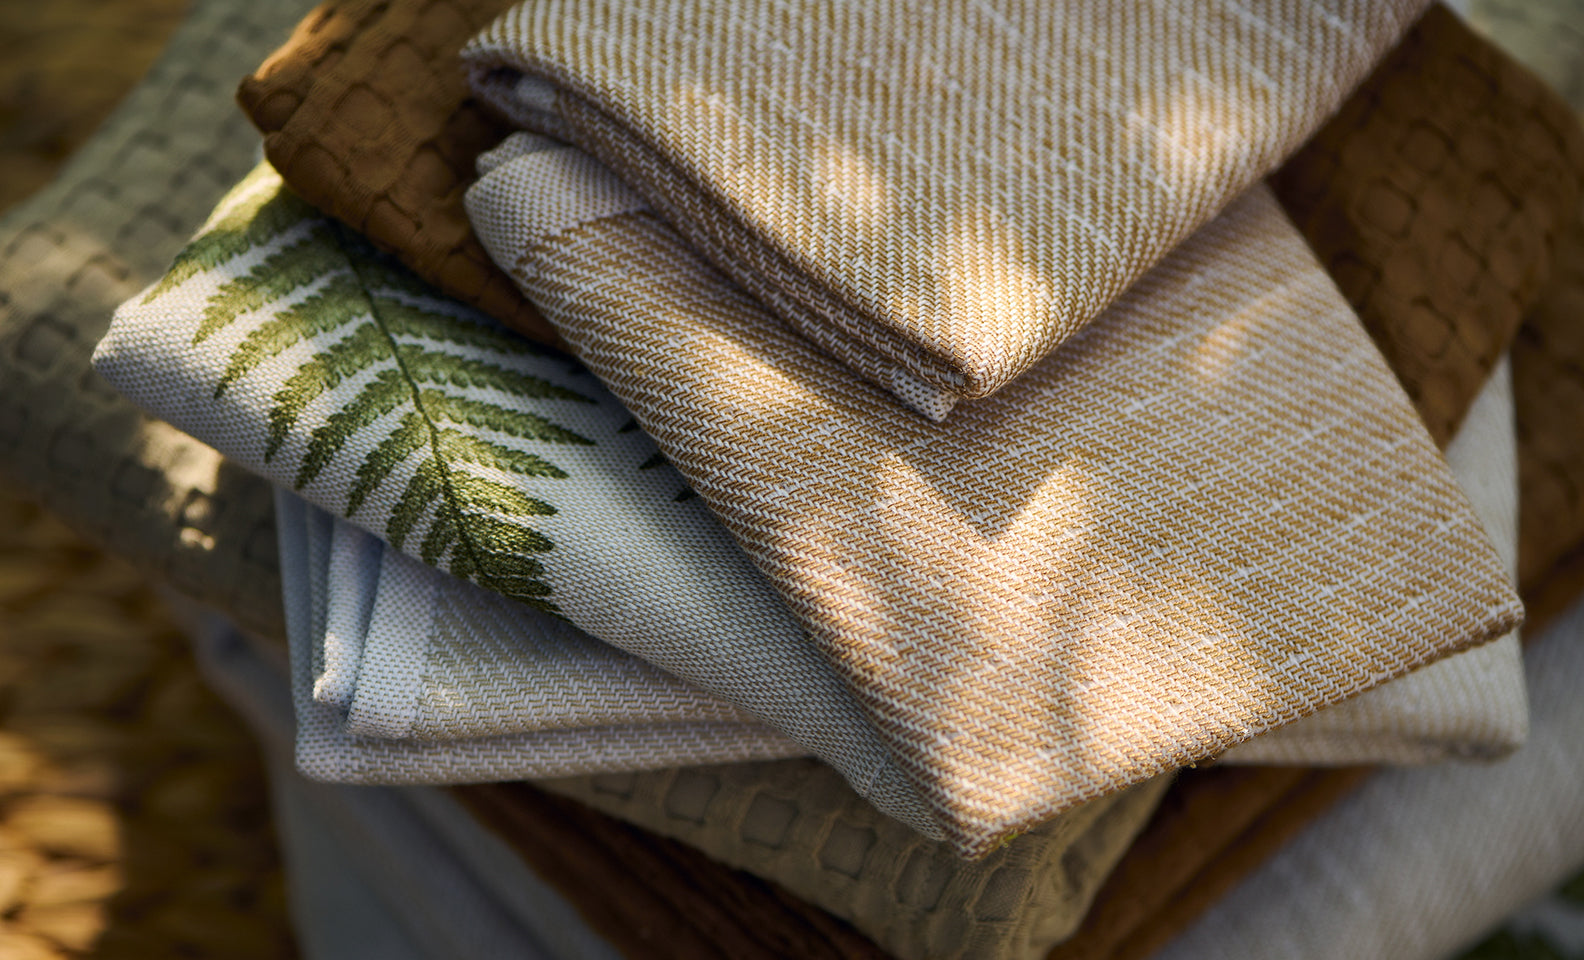 Bamboo Bliss: Exploring the Benefits of Oodaii's Cotton-Bamboo Blend Towels